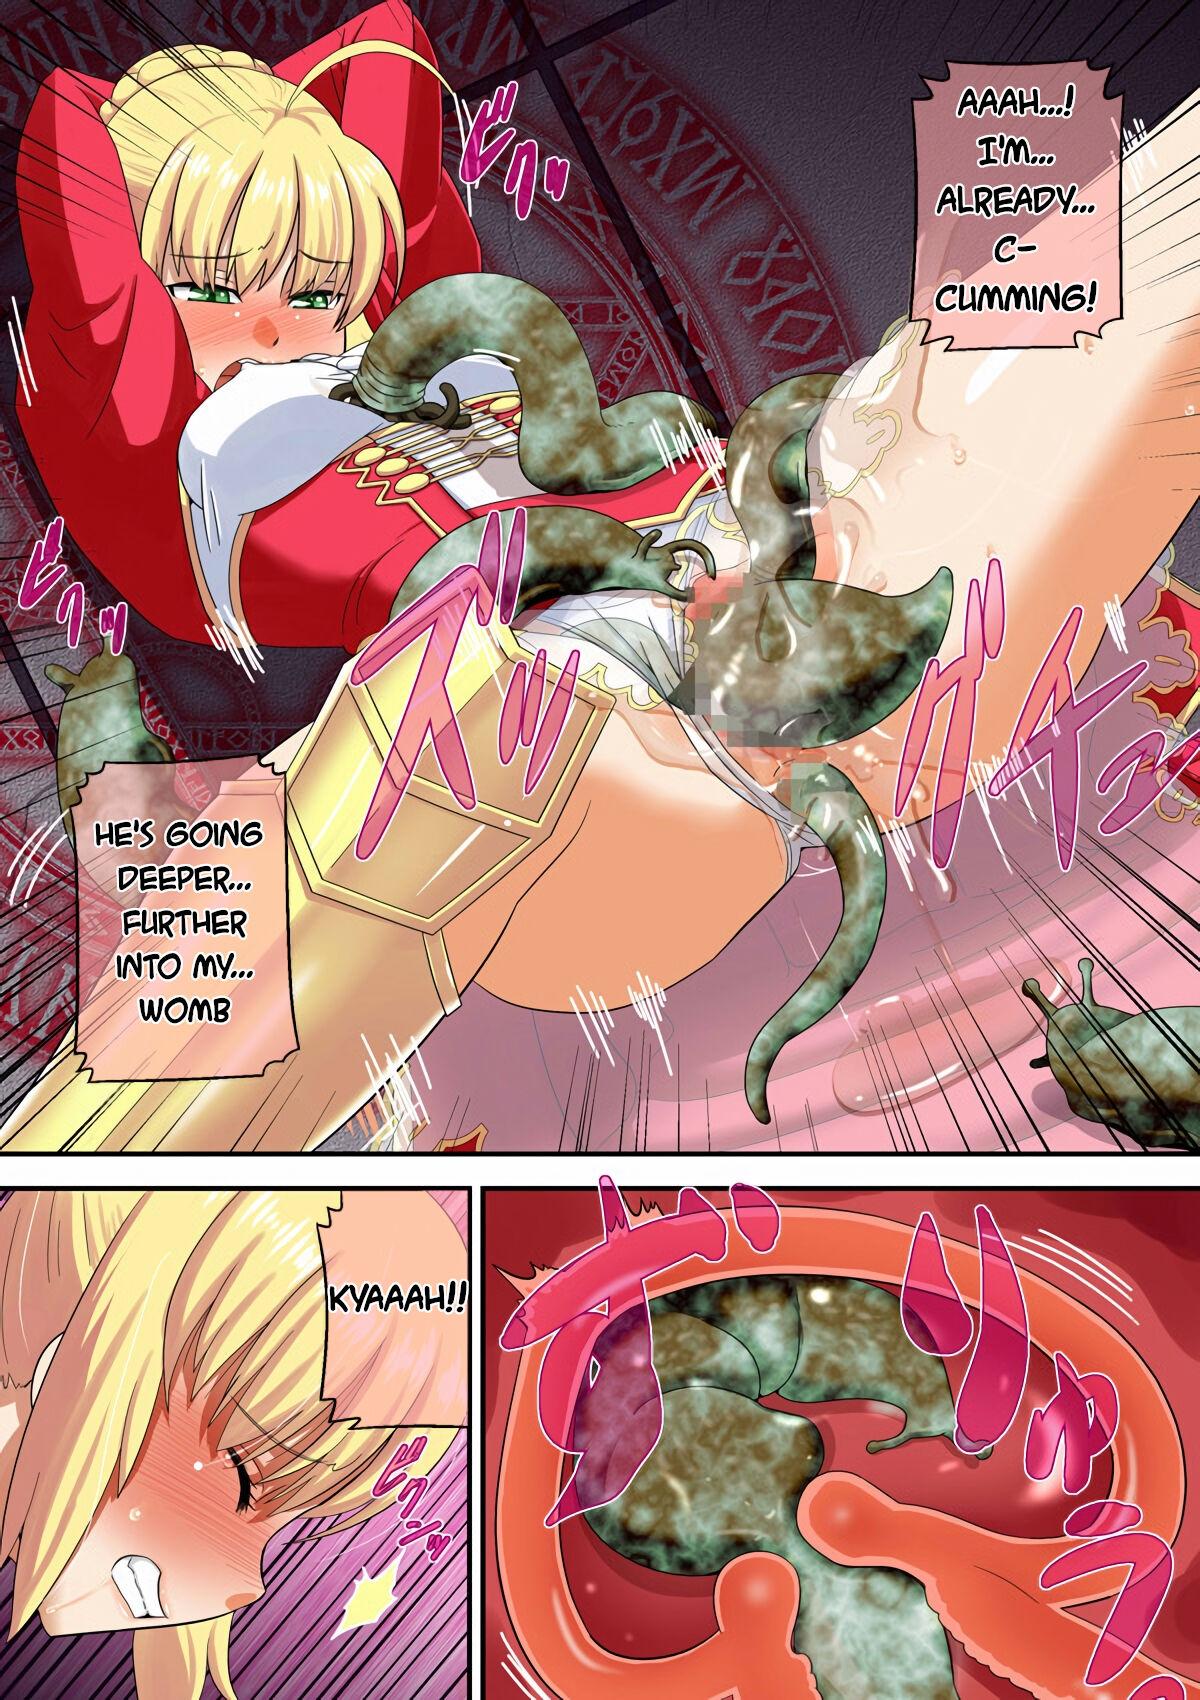 Nut Seedbed: The Female King of Knights - Fate stay night Muscle - Page 7